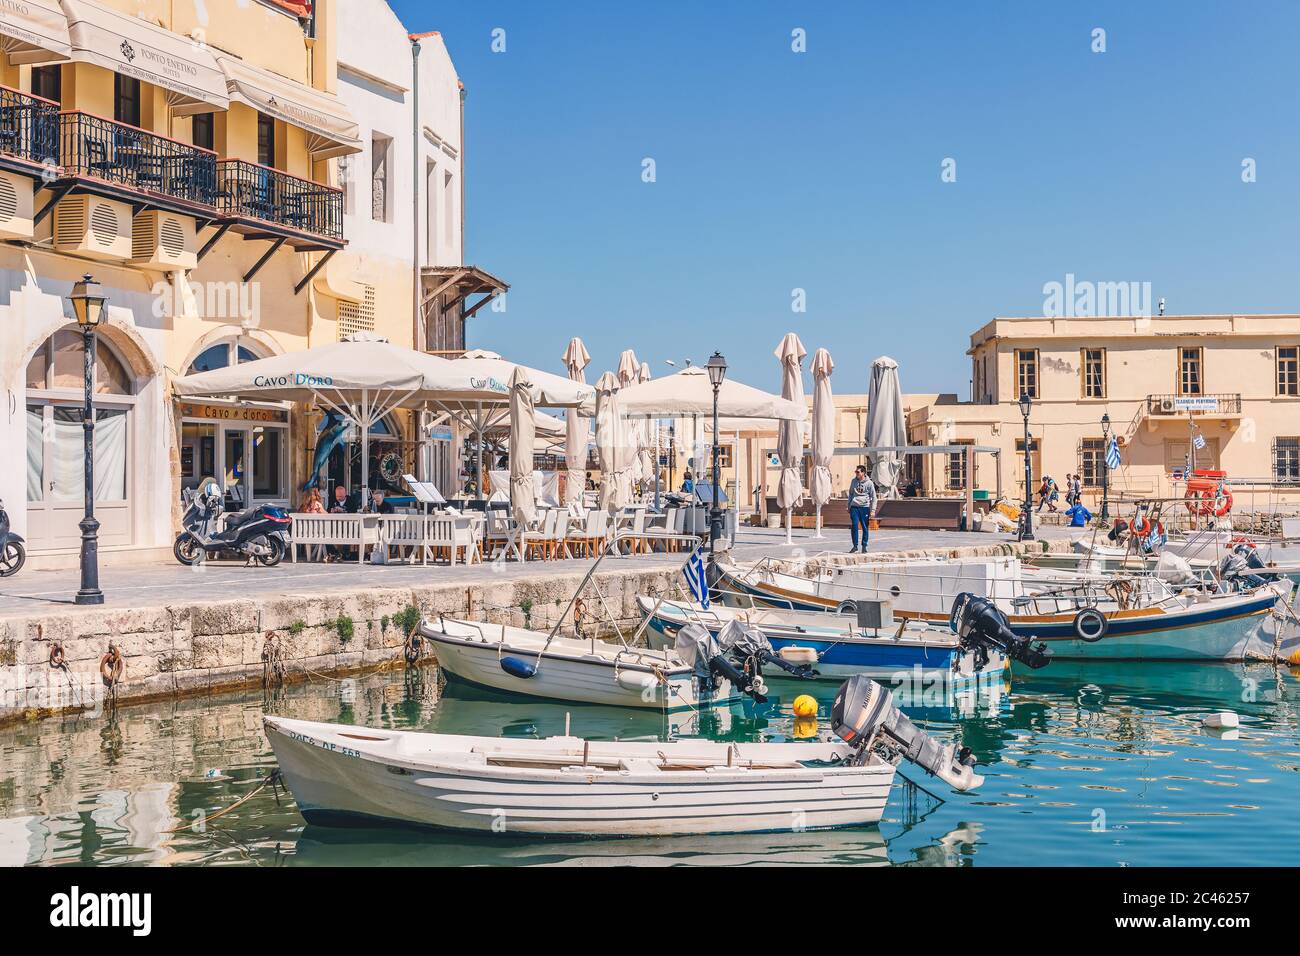 Colourful buildings in the Venetian harbour village of Rethymno on Crete Stock Photo